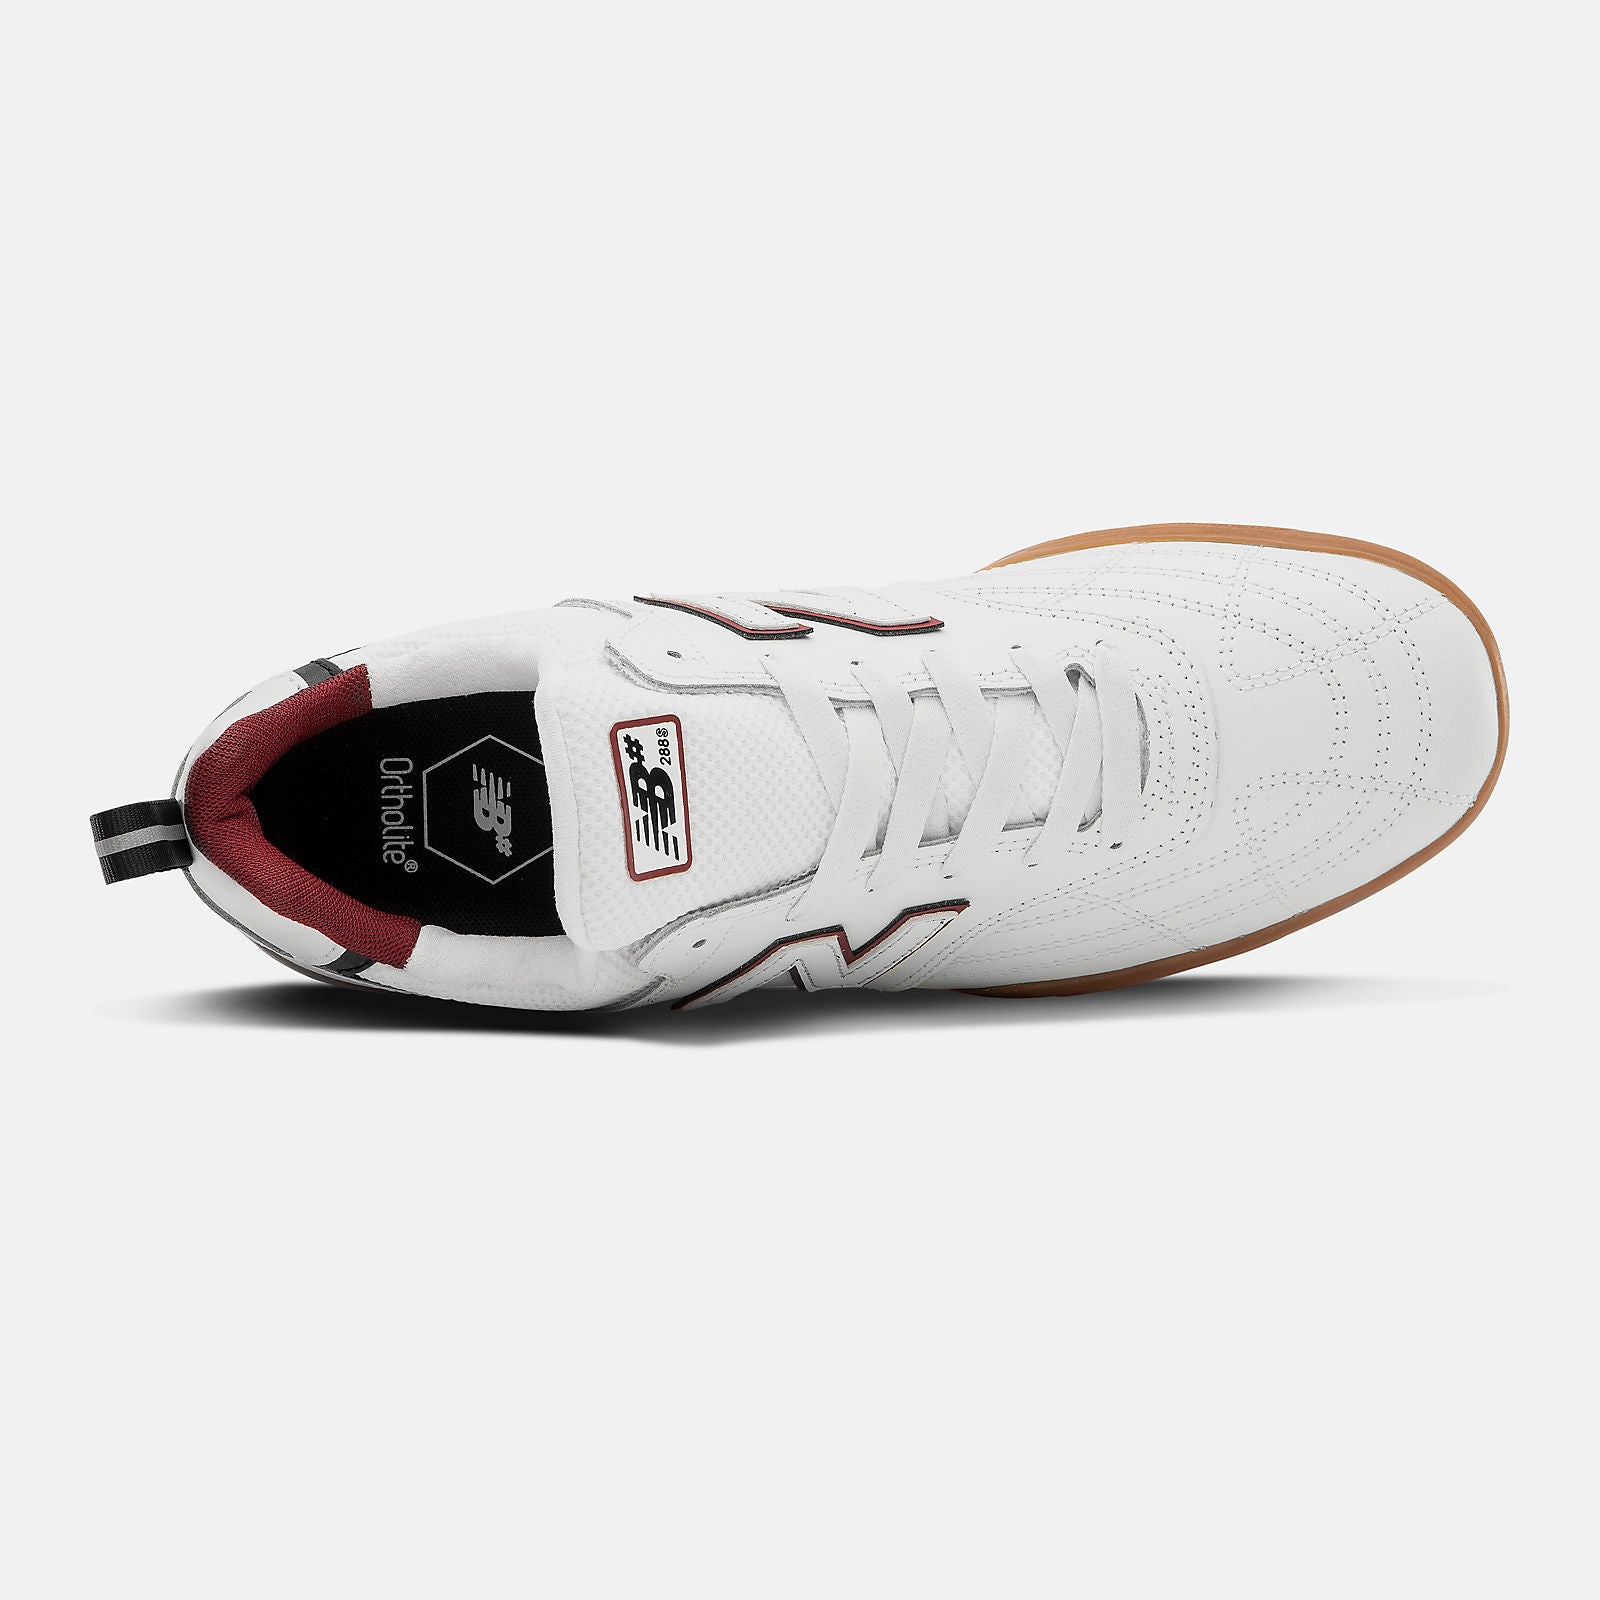 White Leather NM288SWL NB Numeric Skateboard Shoe Top